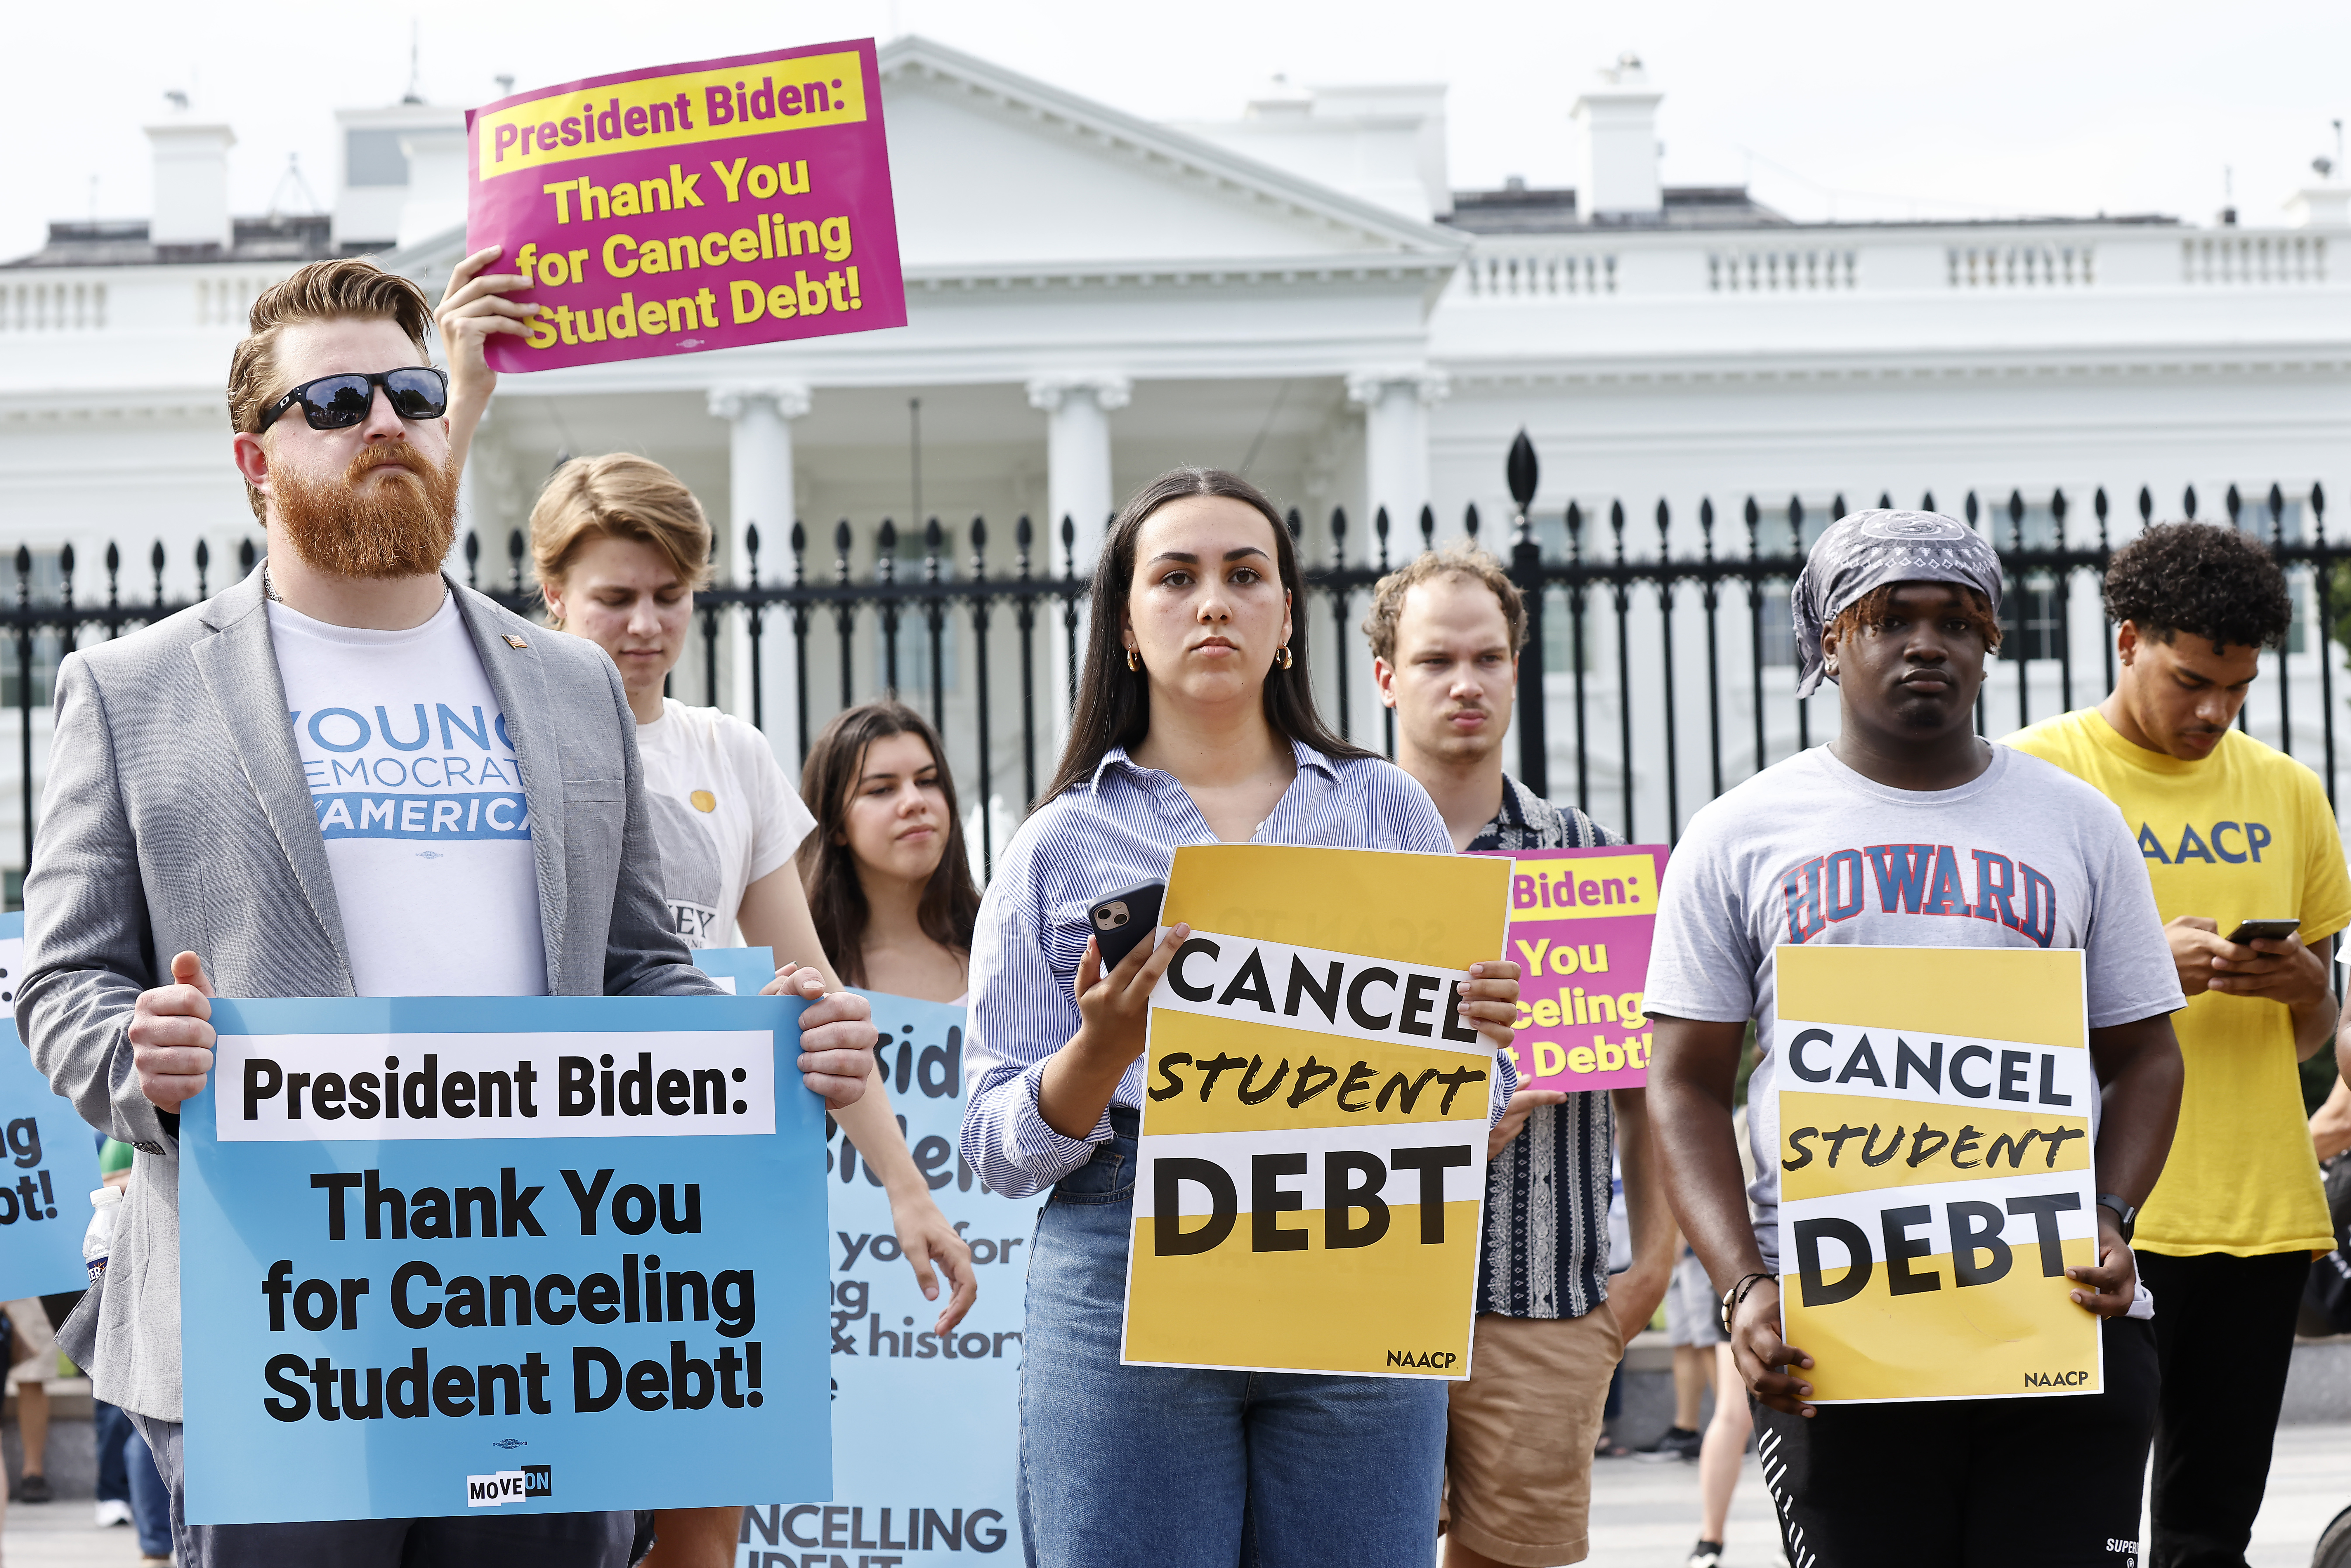 Protesters in front of the White House in Washington, DC, carry signs that read, “Cancel student debt.”